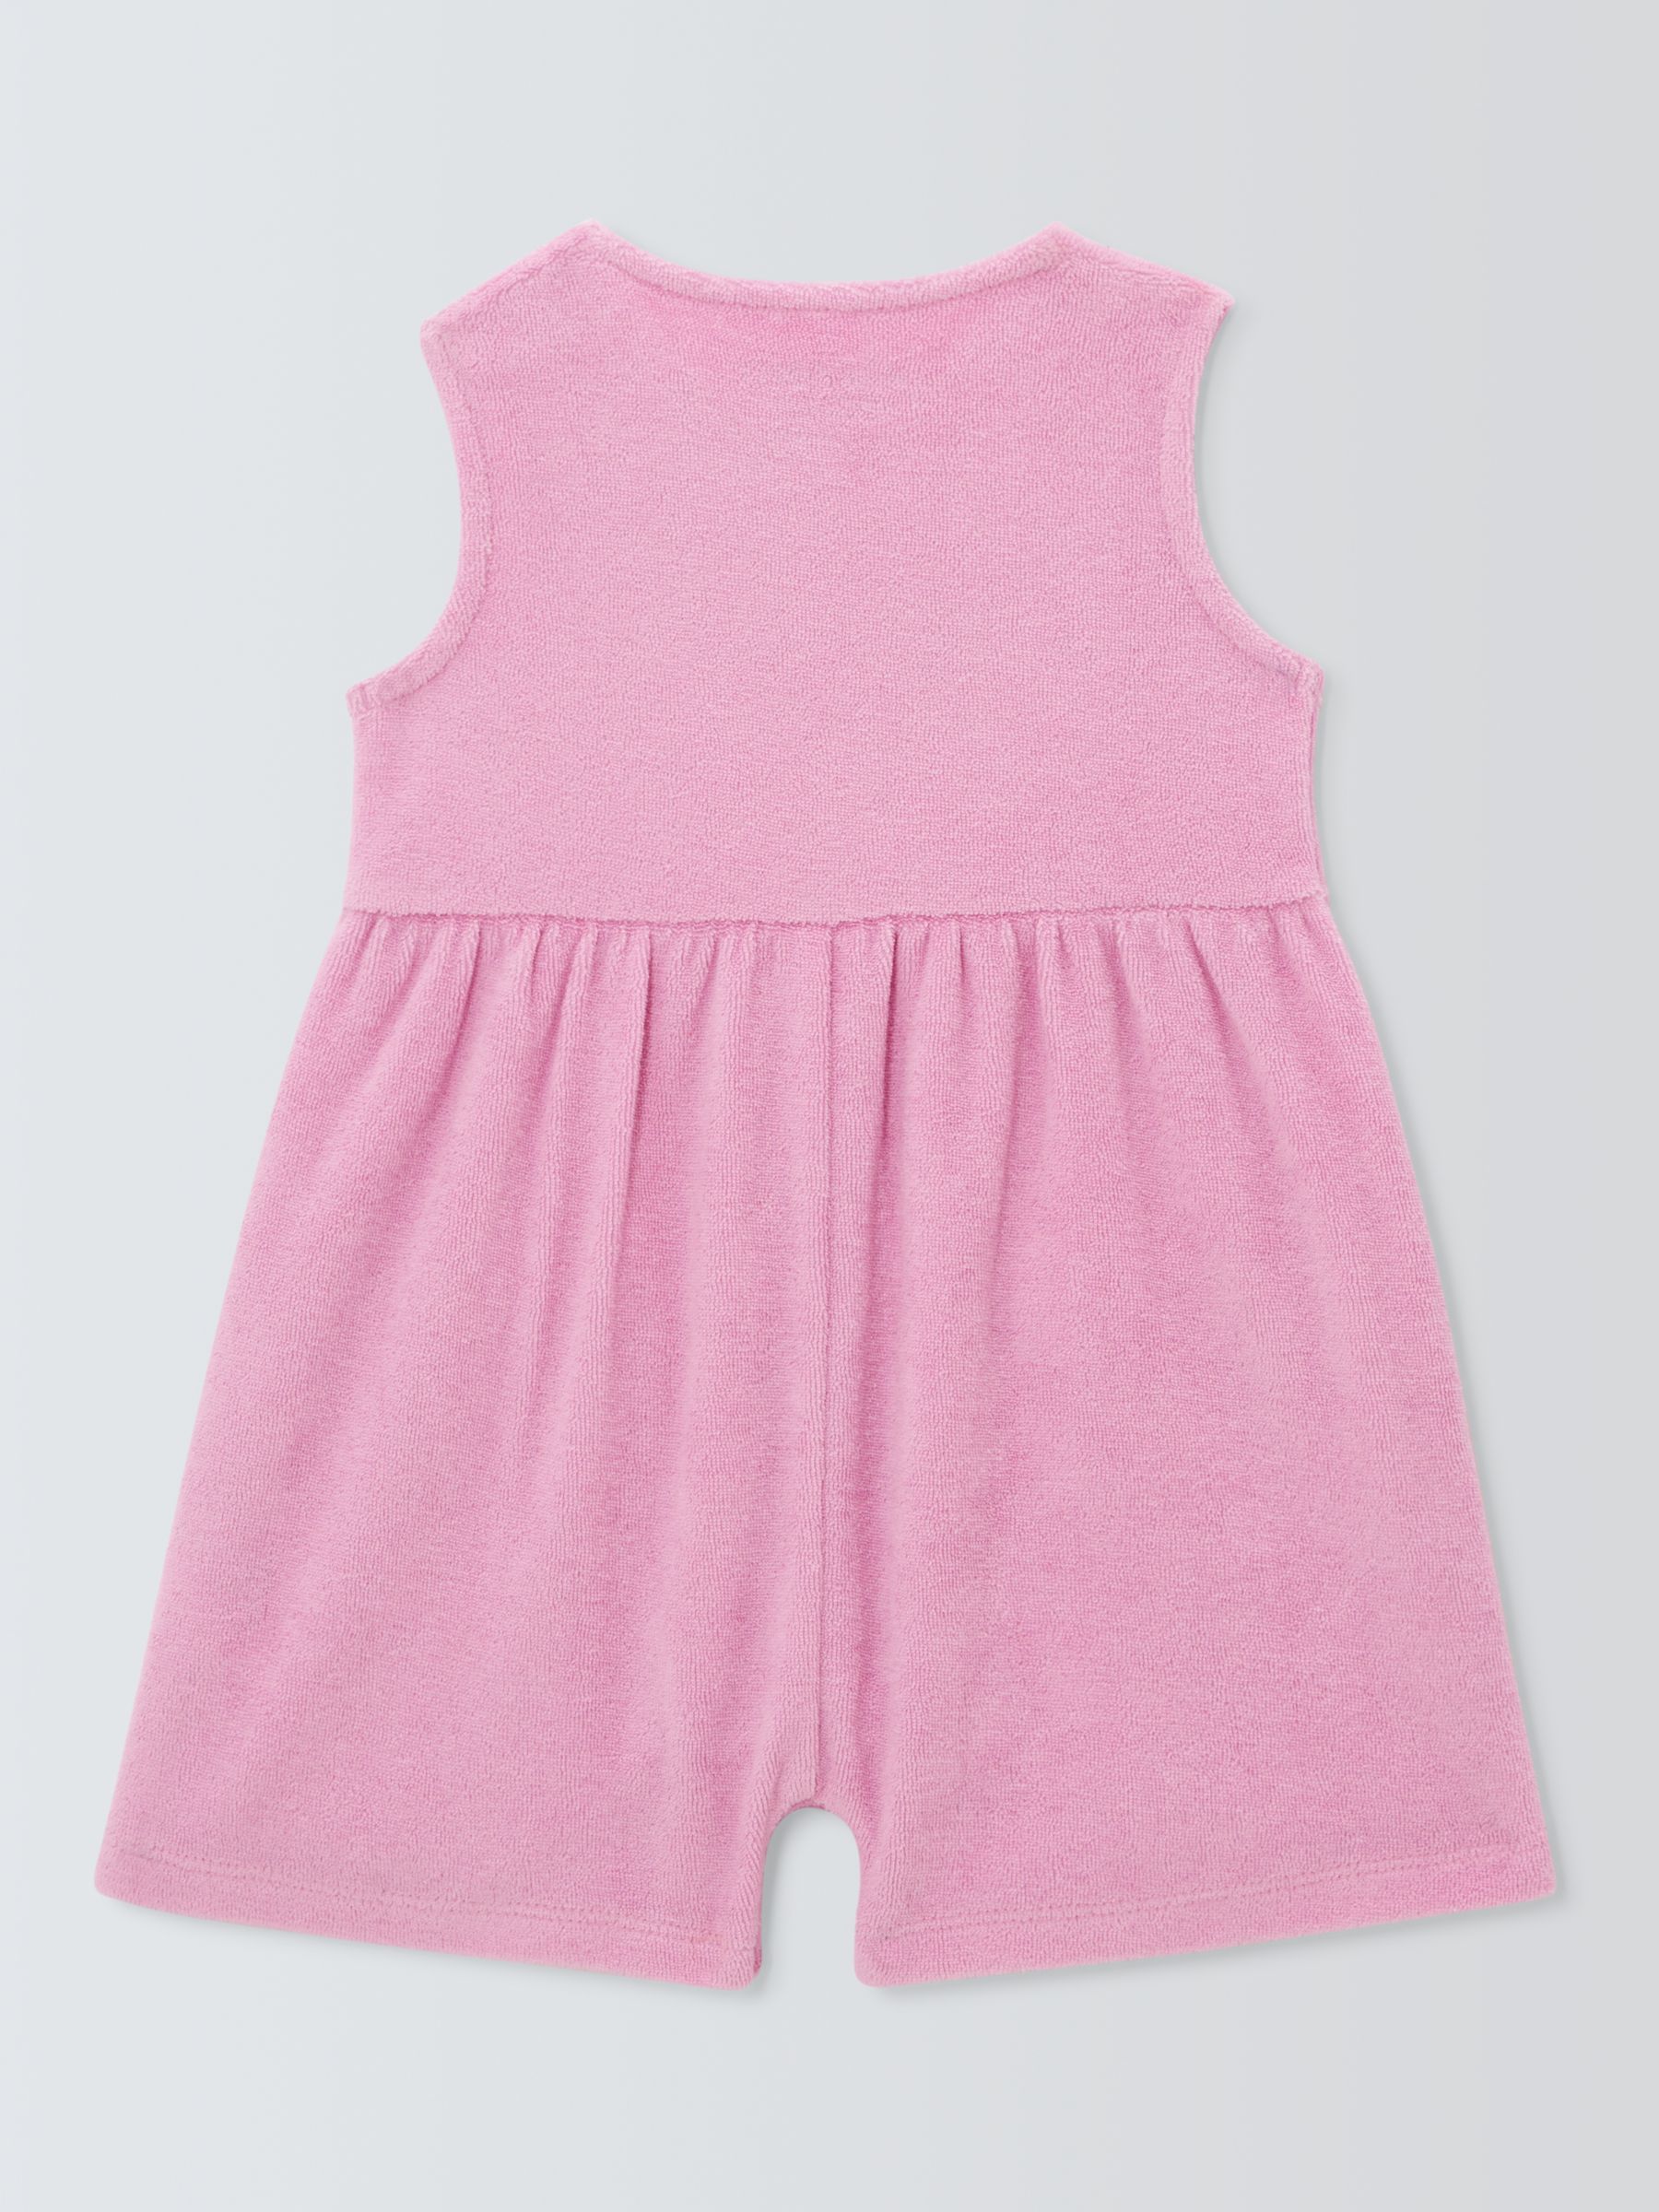 John Lewis ANYDAY Baby Towelling Playsuit, Pink, 9-12 months